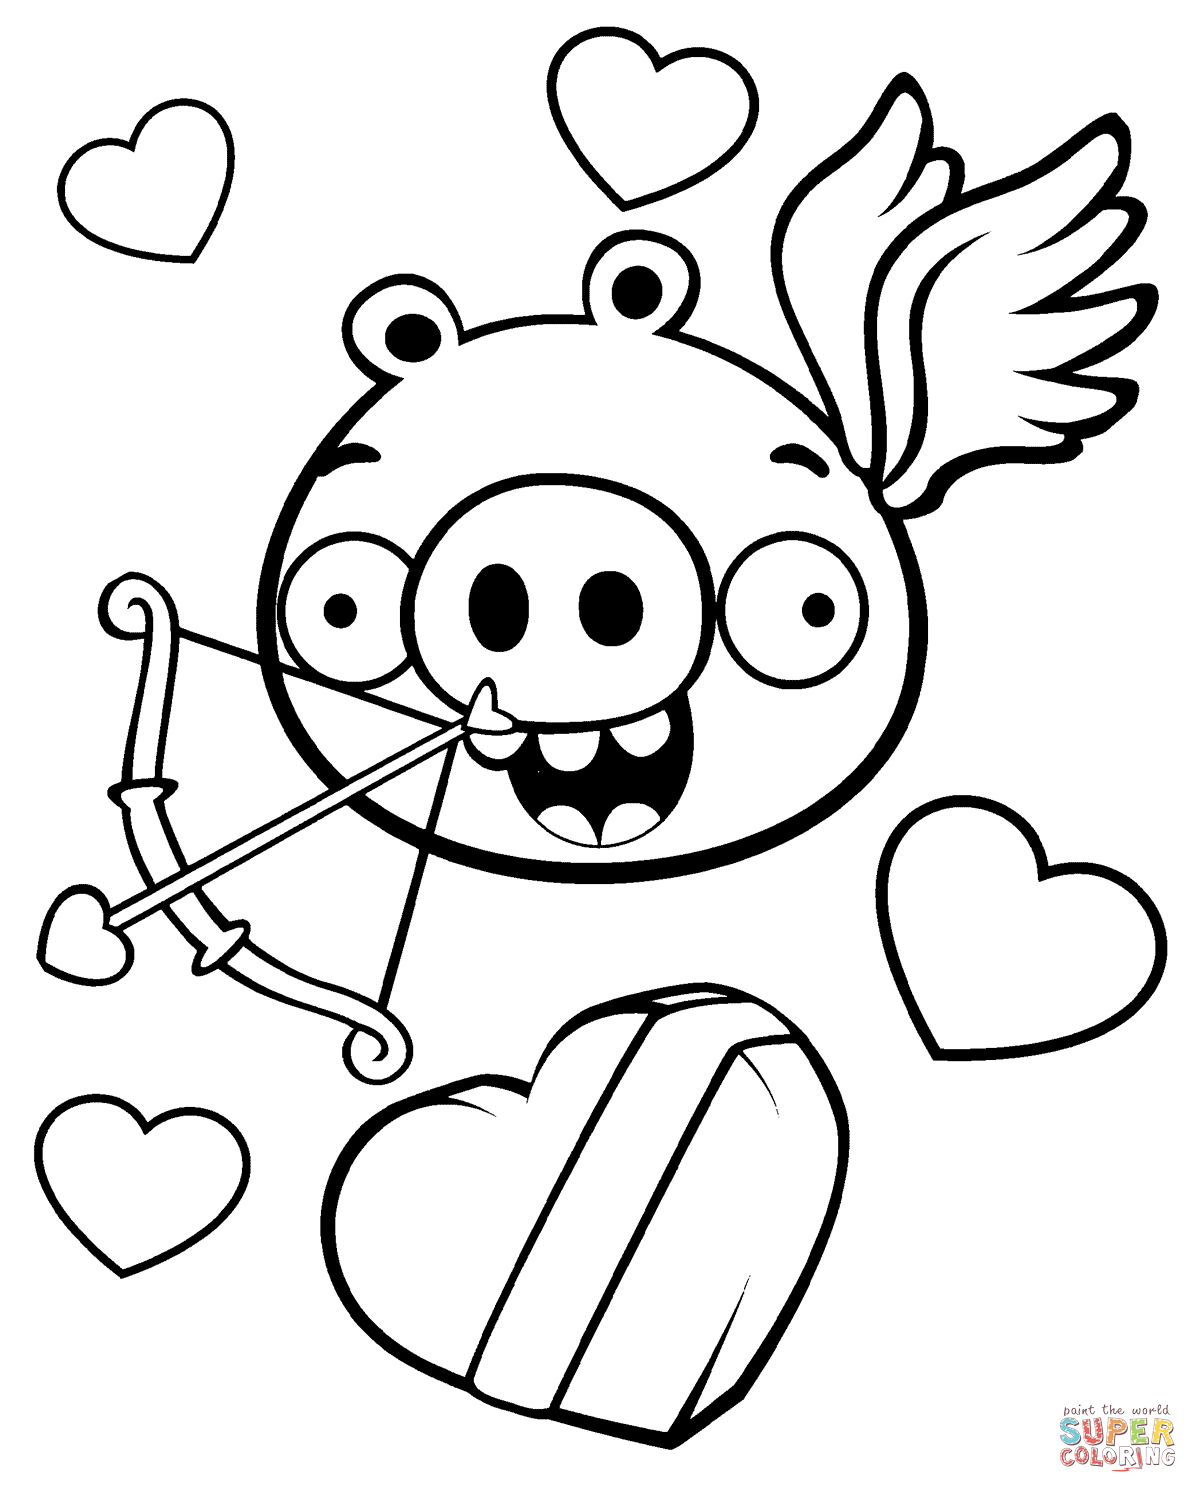 Minion pig valentine theme coloring page free printable coloring pages